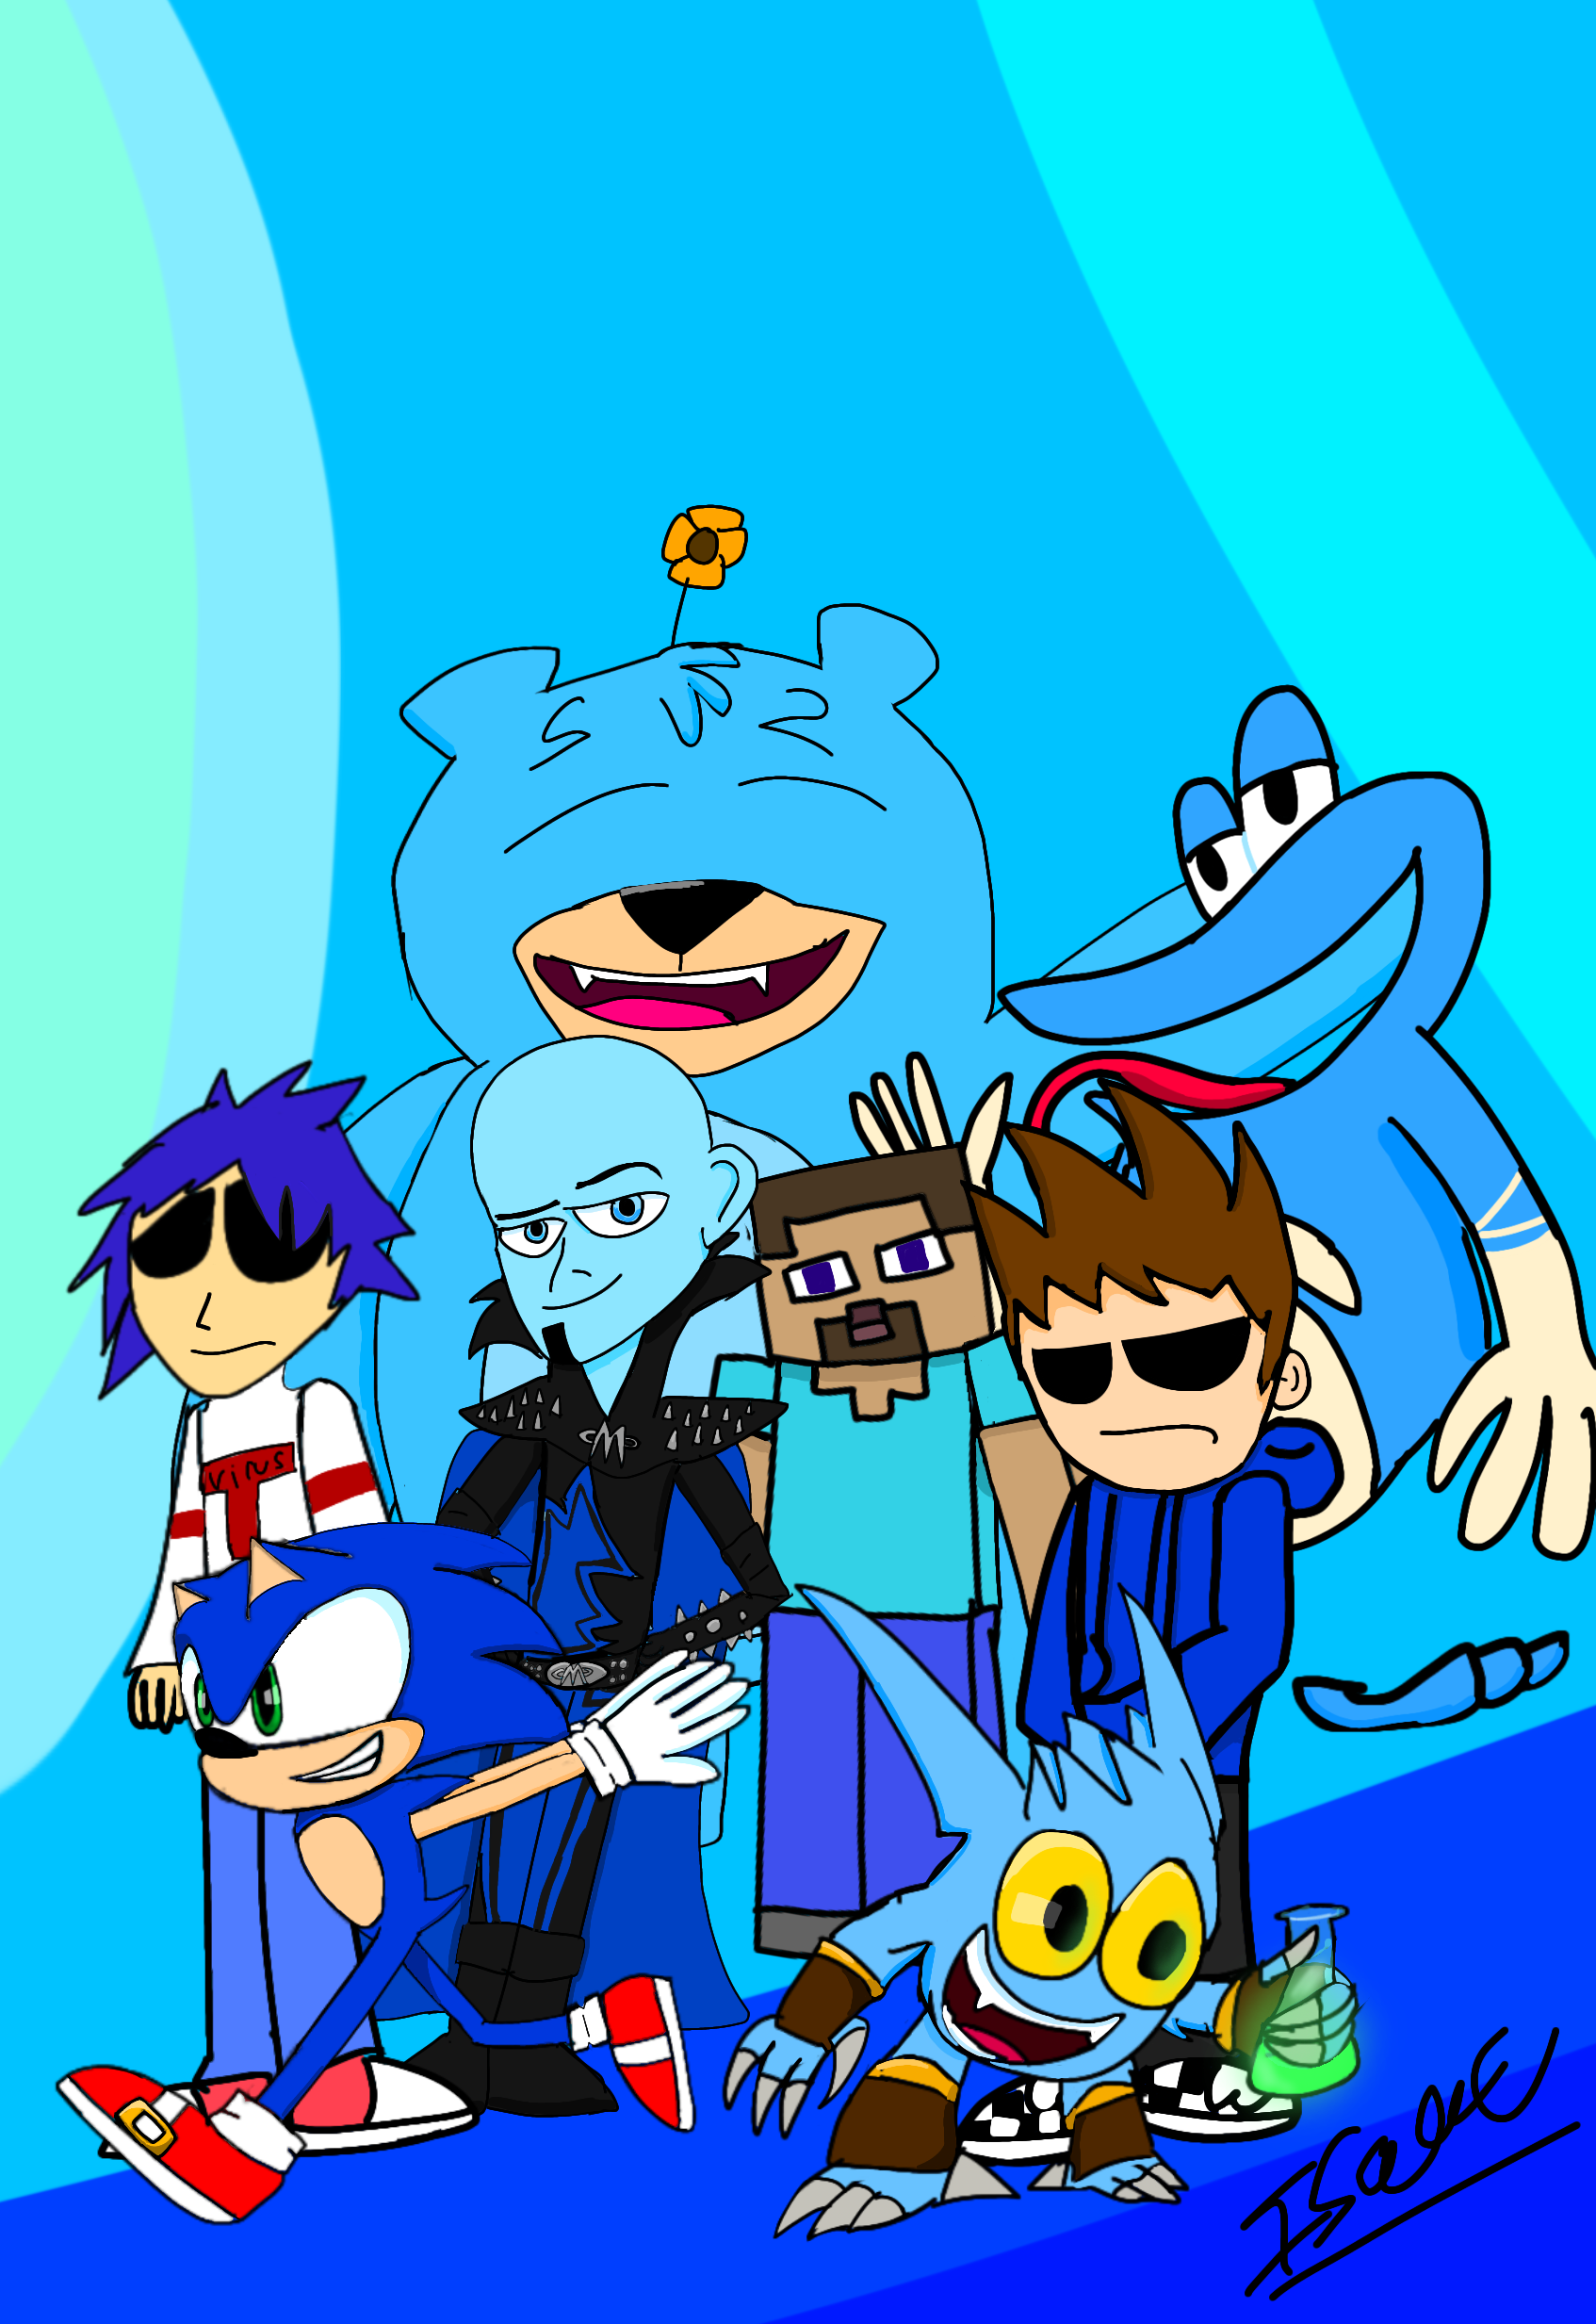 Blue characters by IsaacL64 on DeviantArt